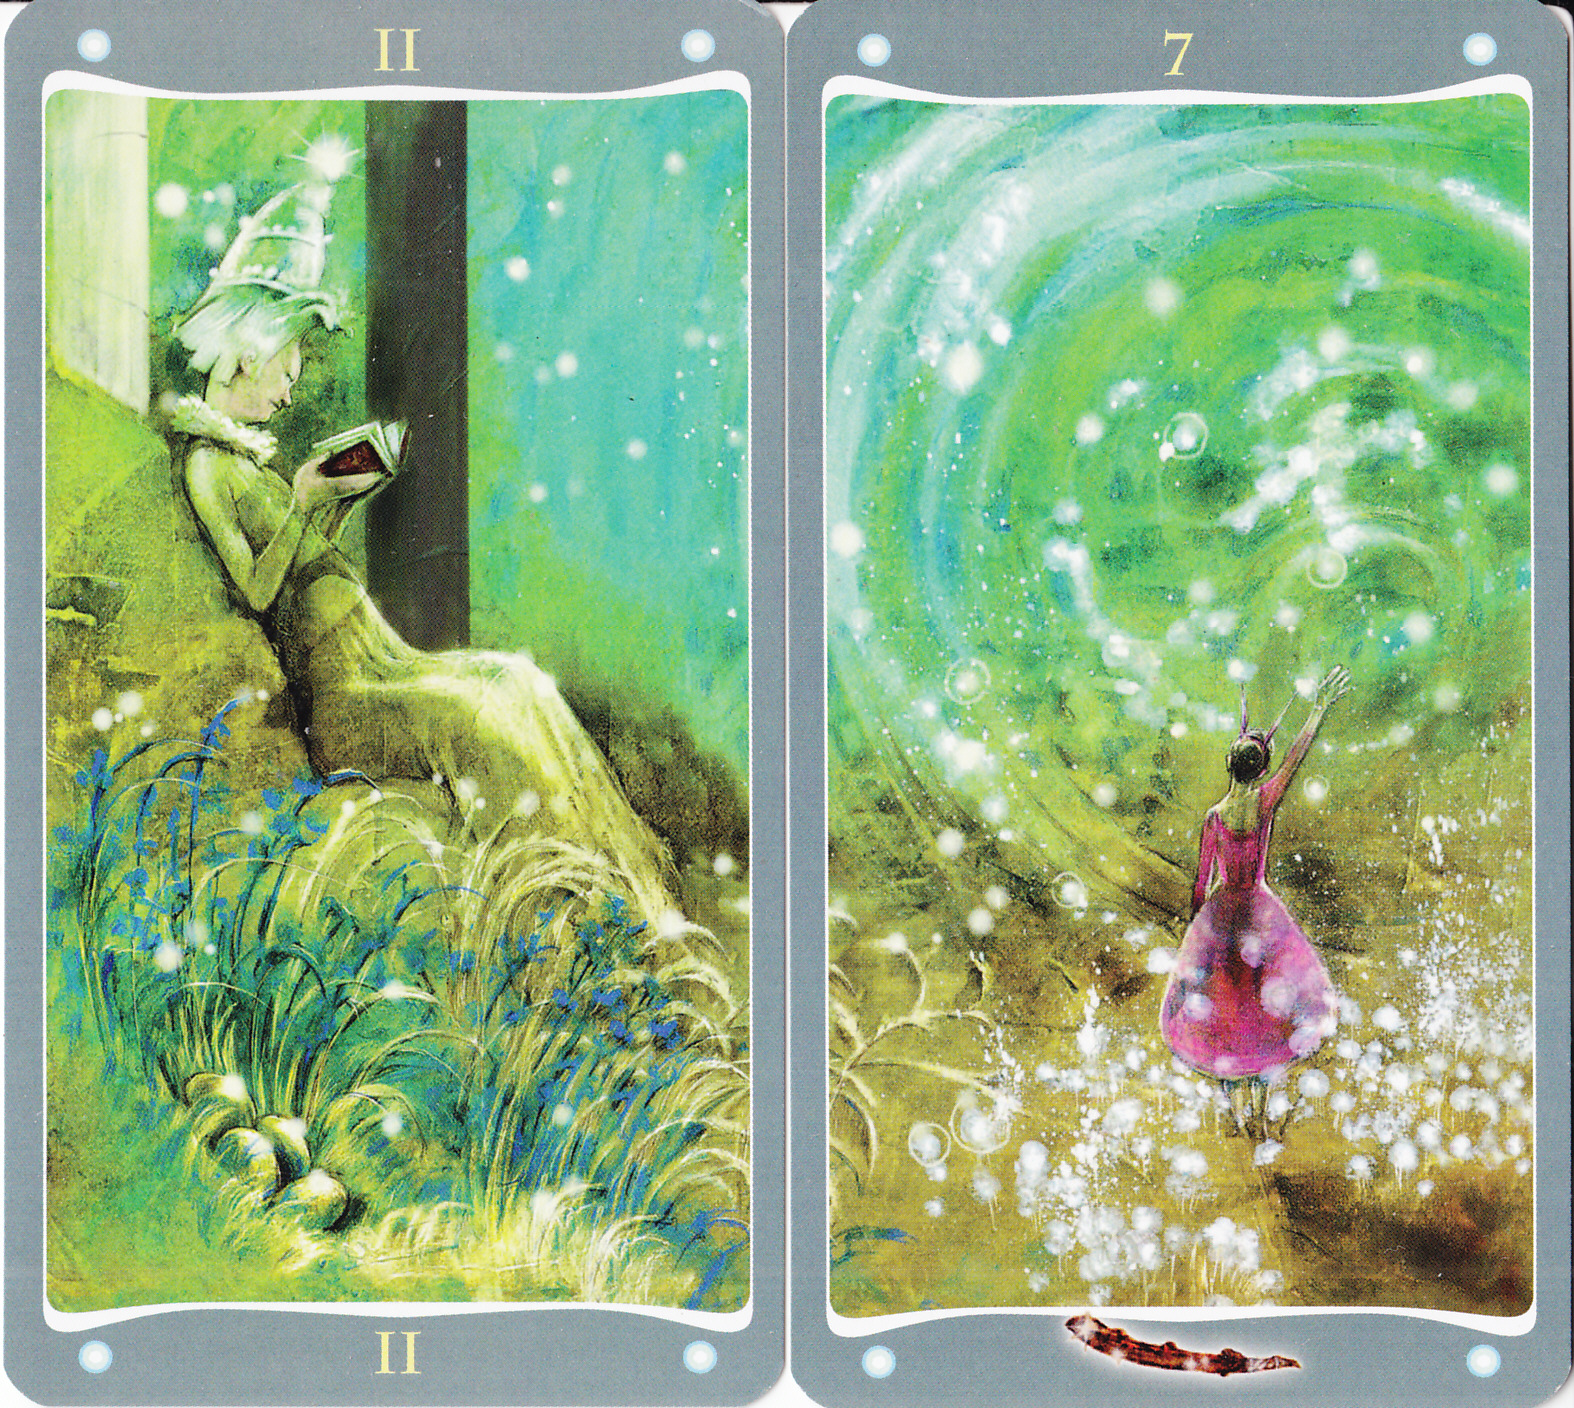 Today's pair from Fairy Lights Tarot (LoScarabeo 2013) is the High Pri...